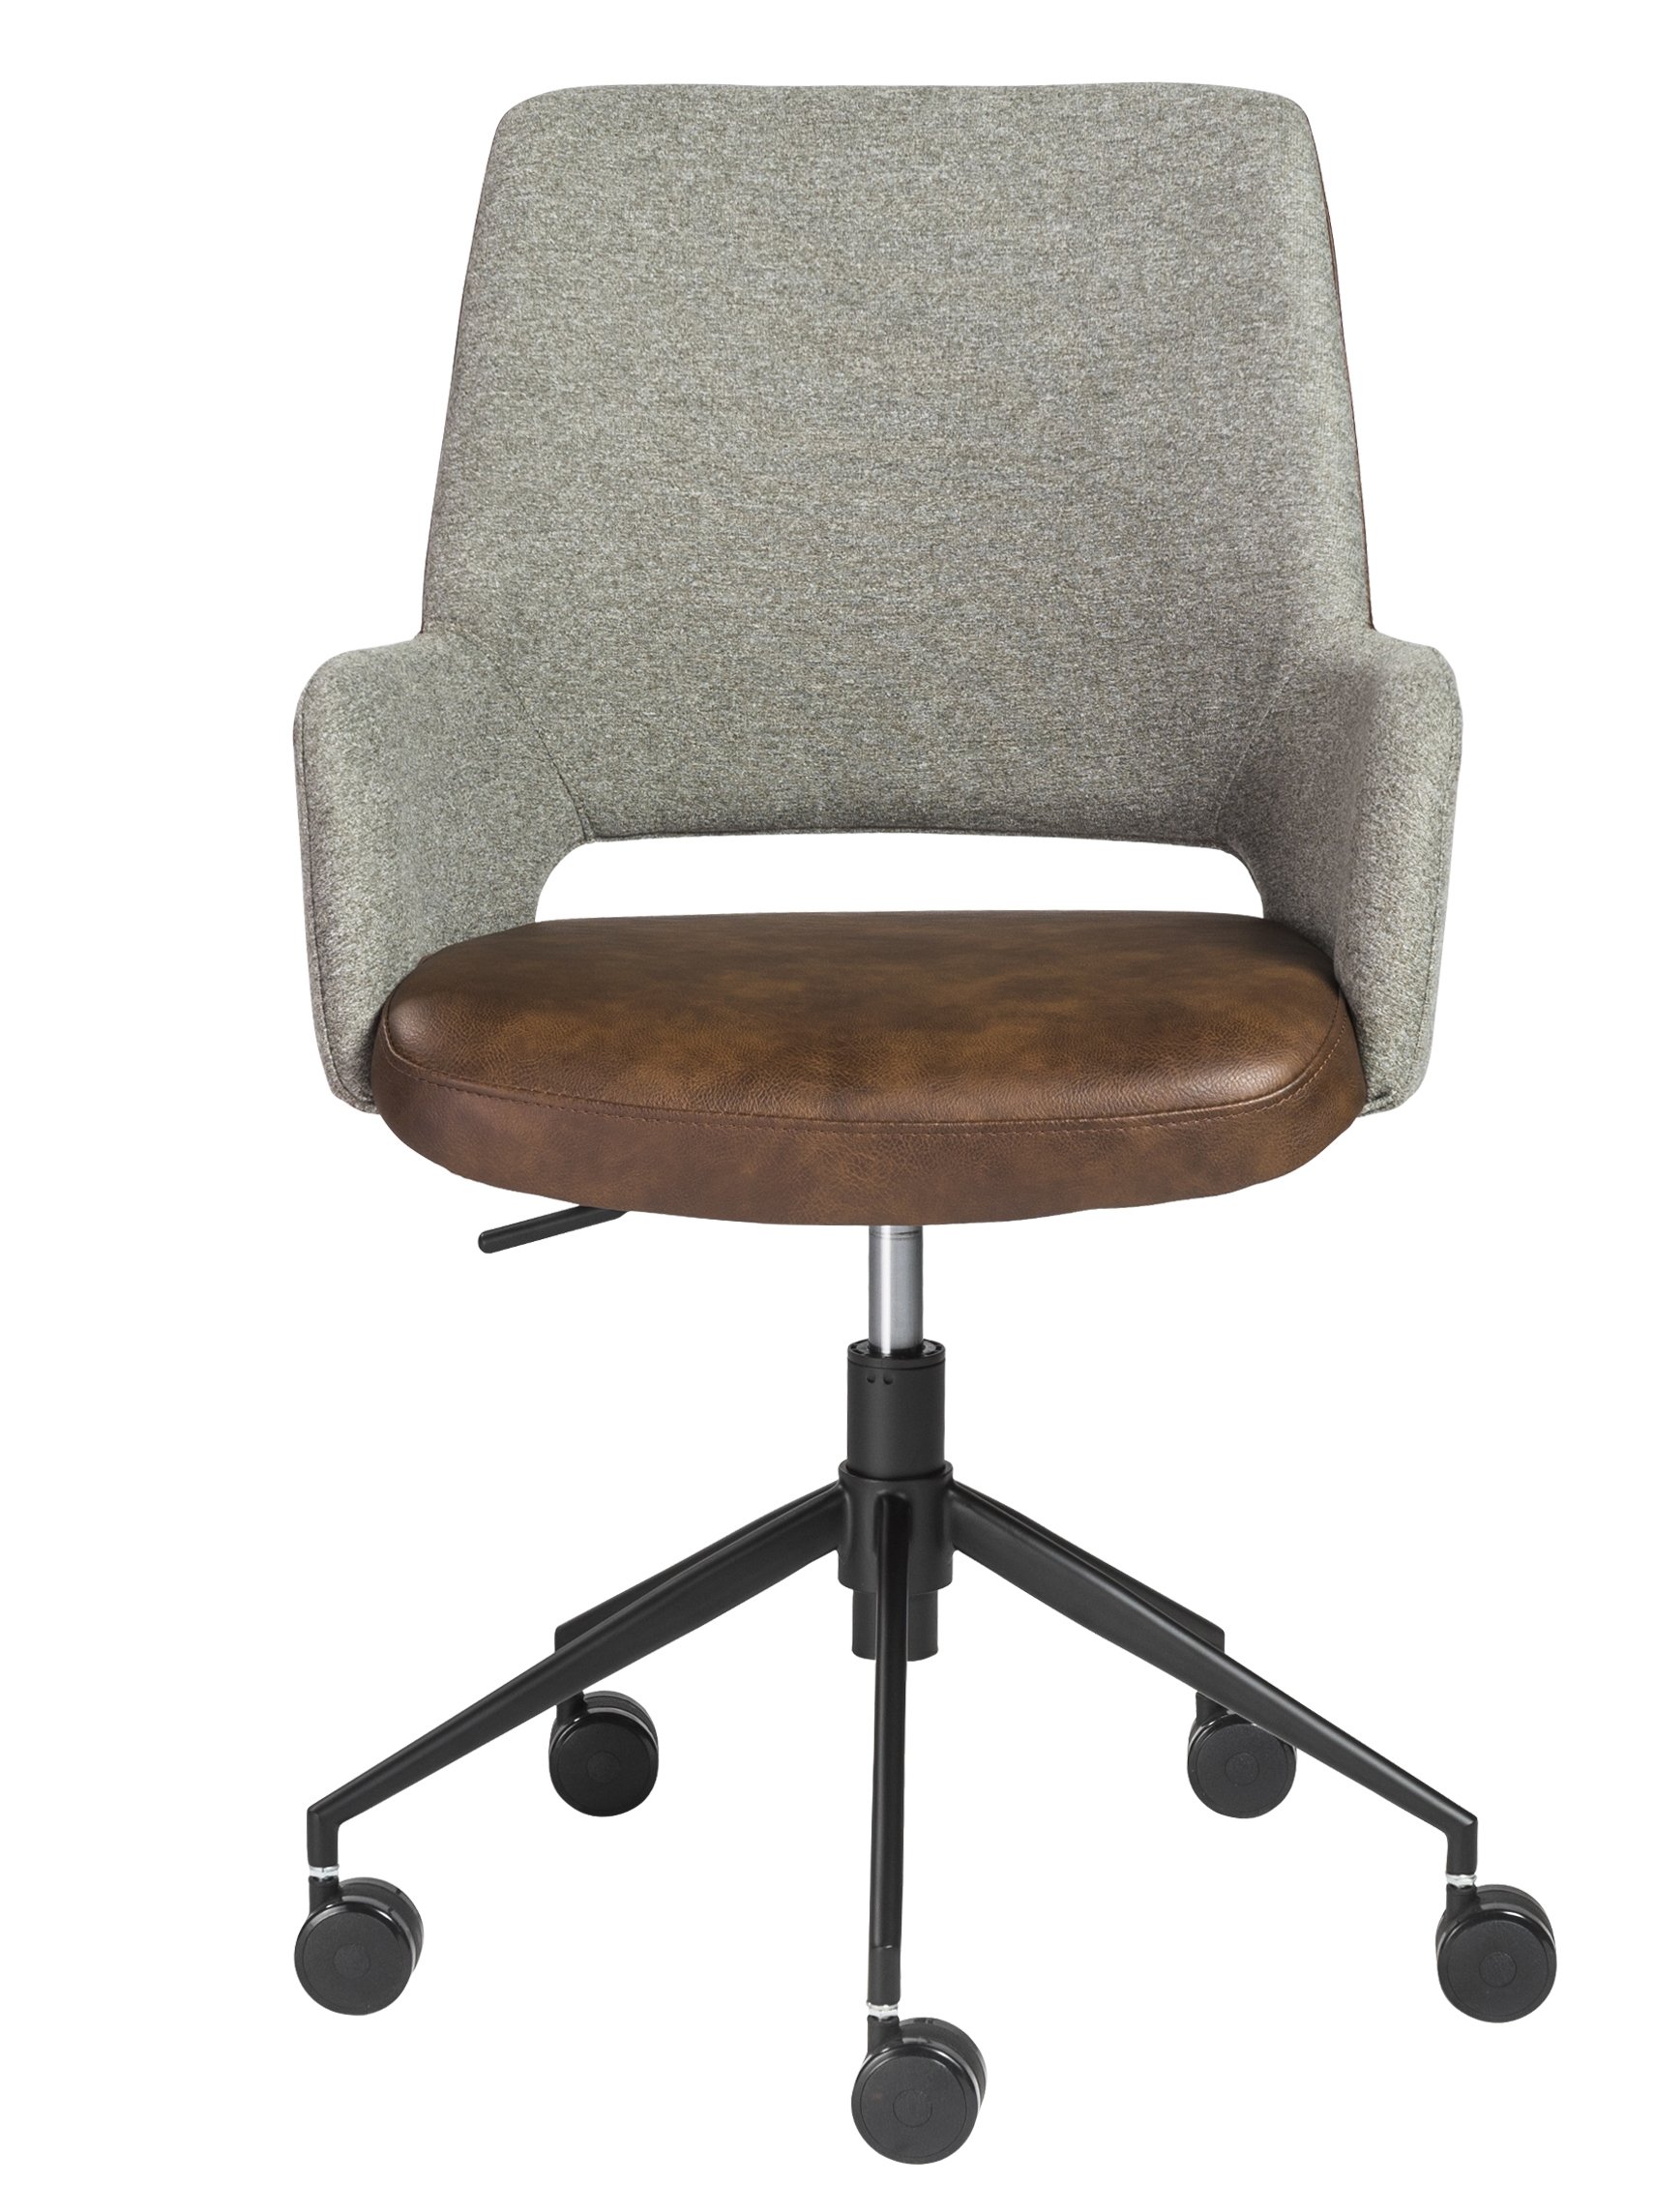 Randy Office Chair, Gray and Brown - Image 5